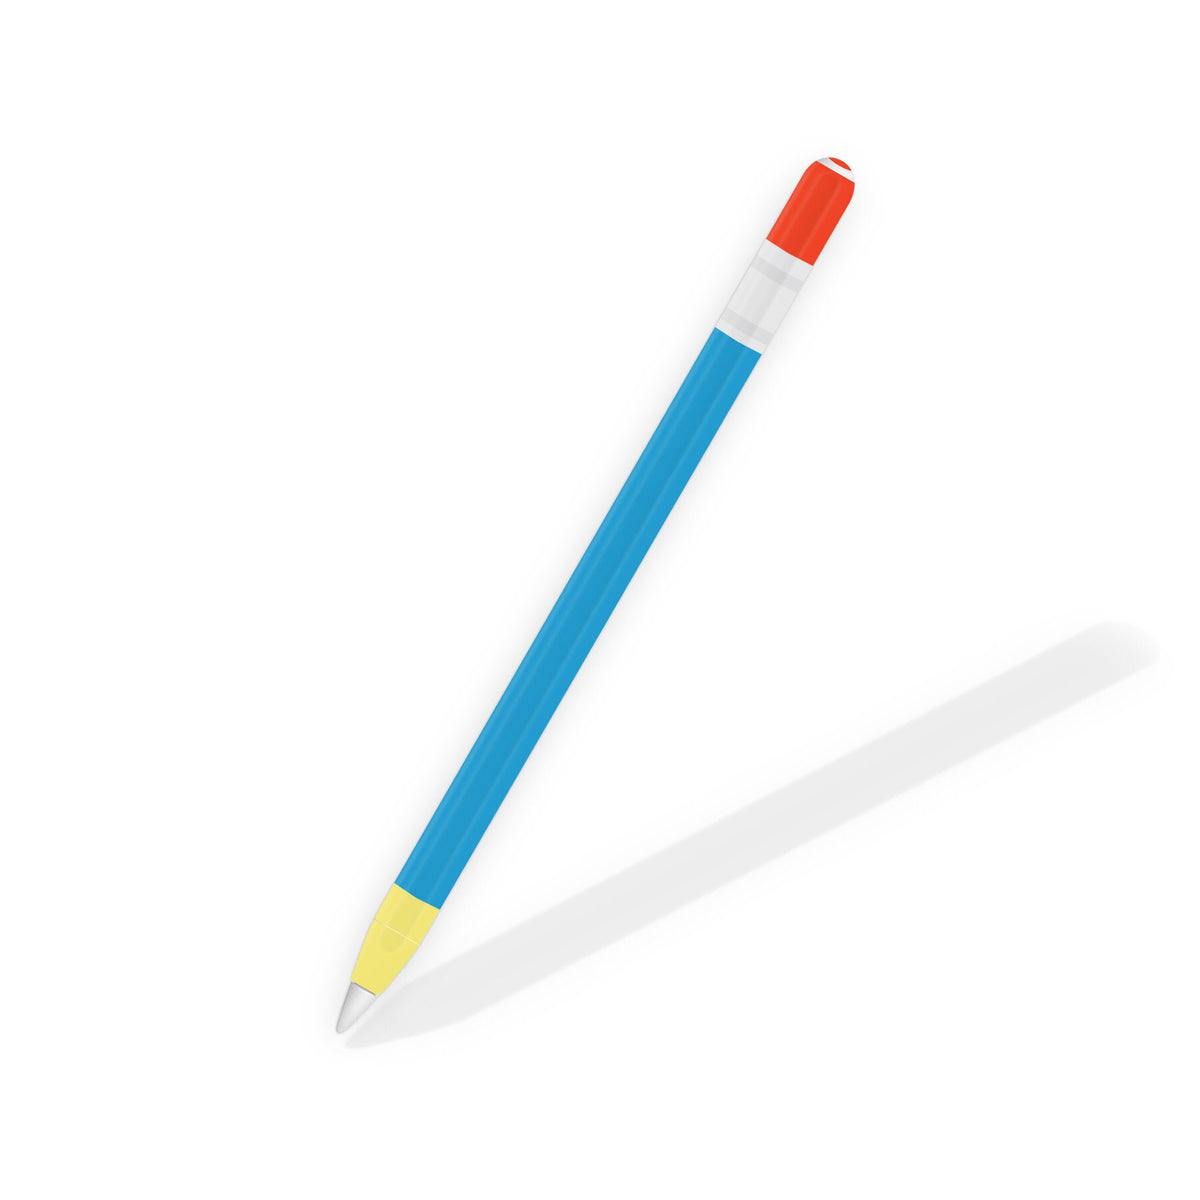 School Apple Pencil skin blue, Available for Gen 1 And Gen 2, High-Quality 3M Vinyl full wrap